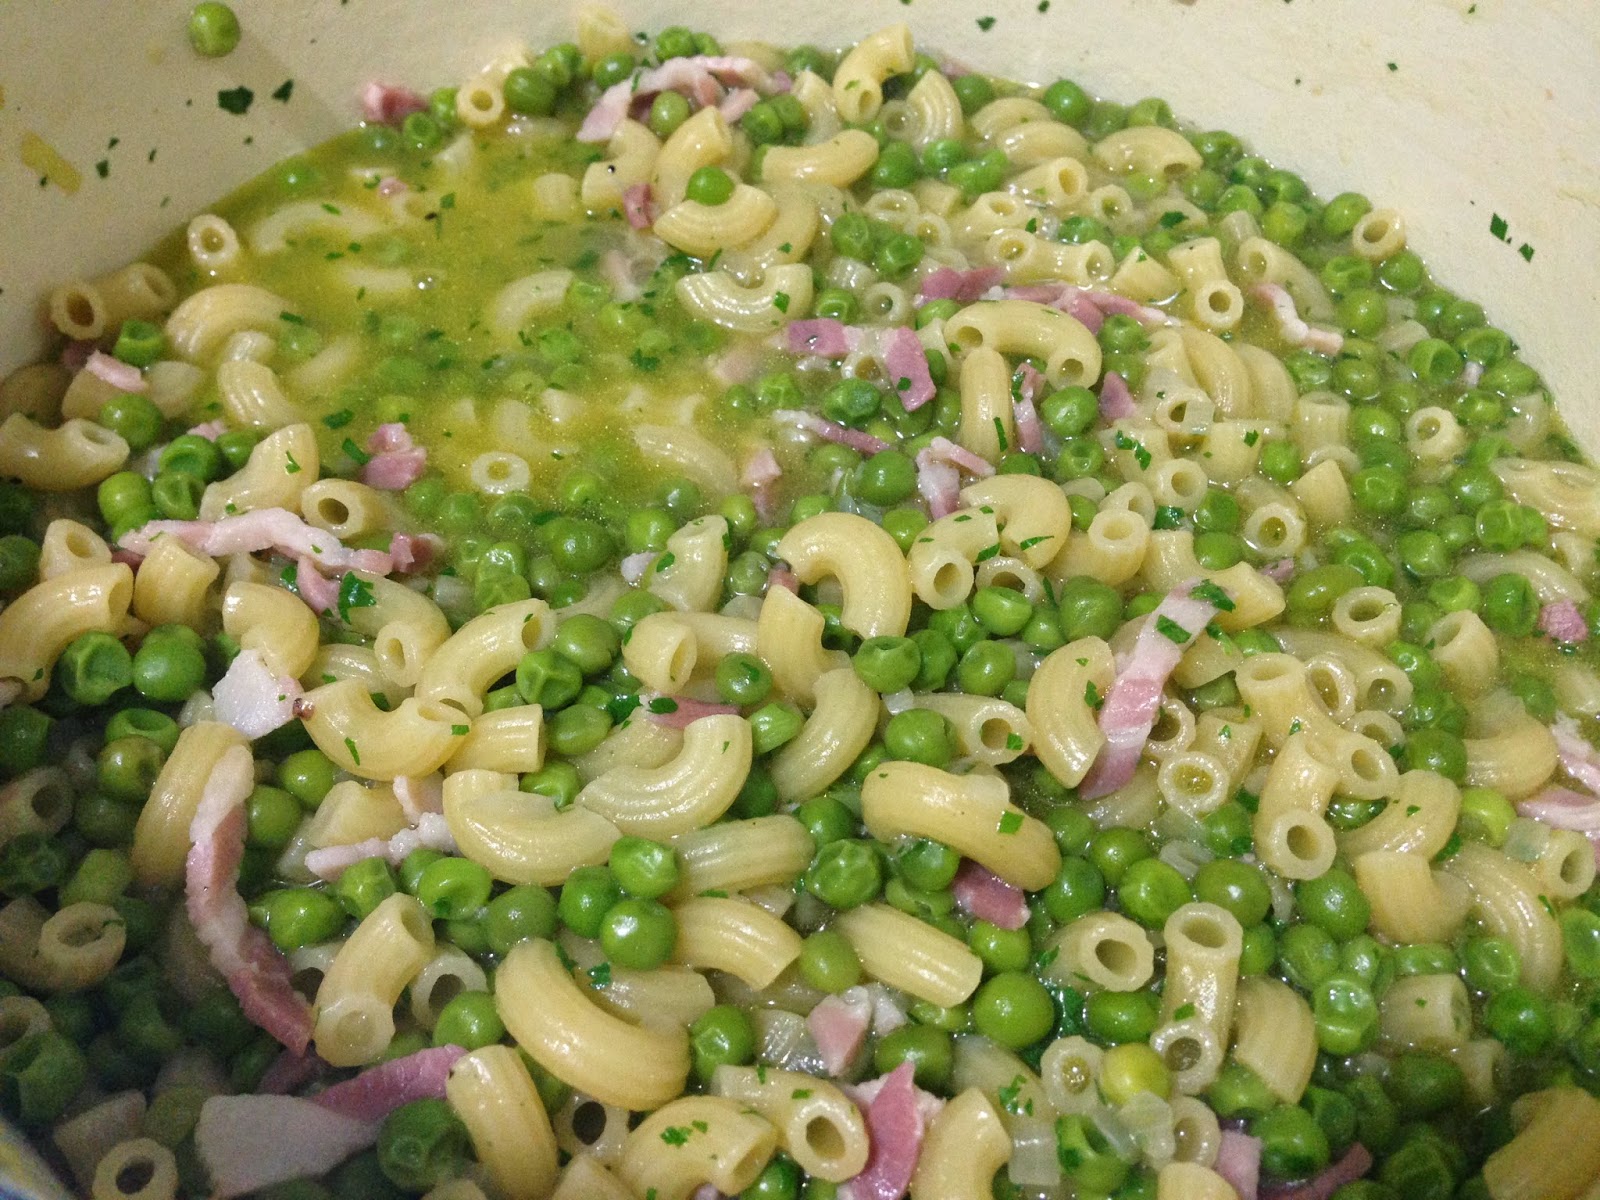 Pasta Soup with Peas from The Art of Pasta cookbook